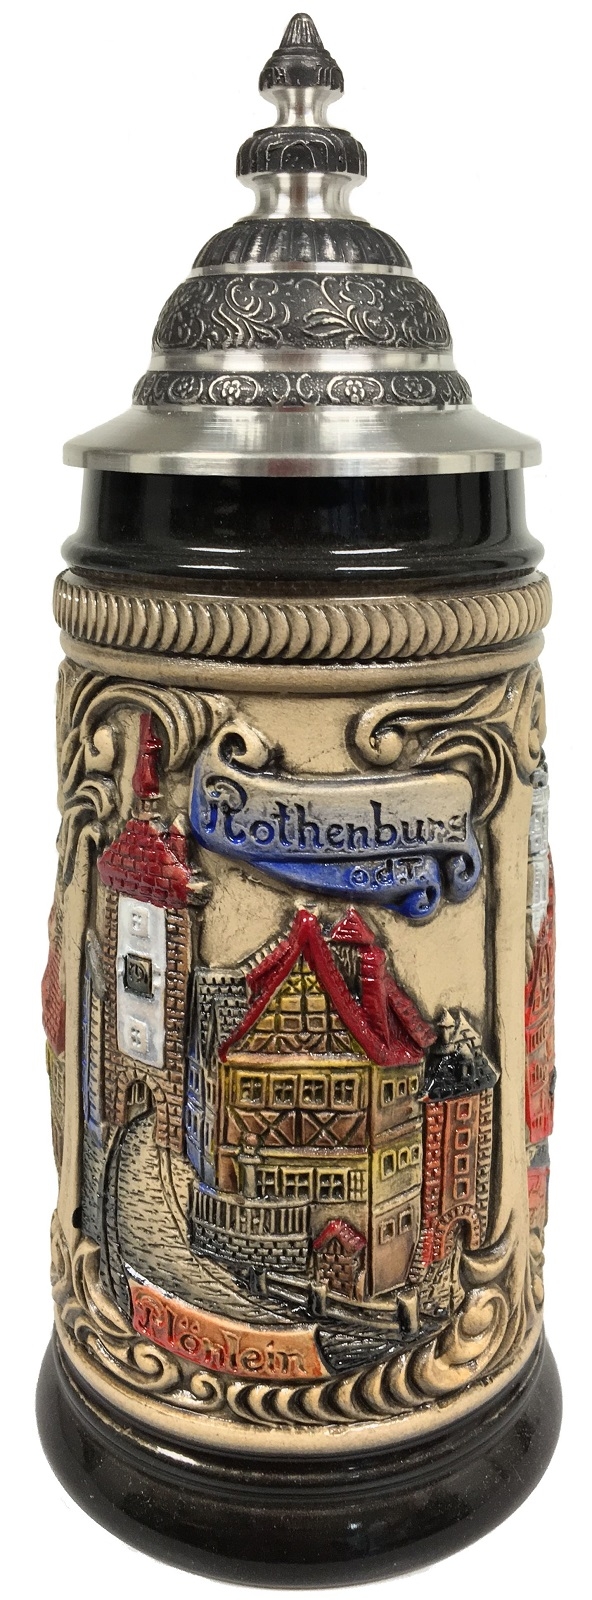 Rothenburg Germany Scenes of the City Colored Relief German Beer Stein .25 L